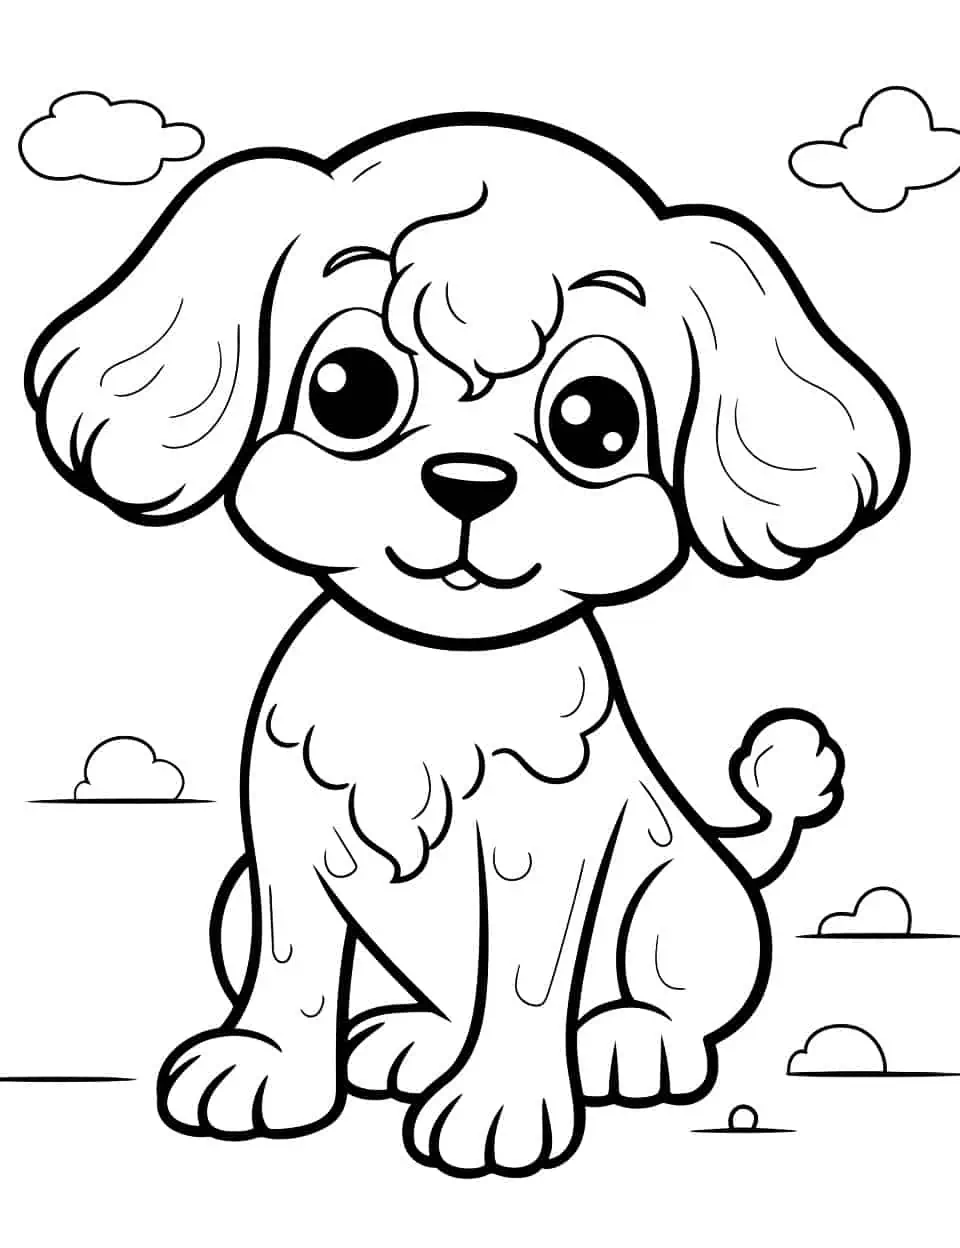 Kawaii Poodle Dog Coloring Page - A super cute Kawaii-style Poodle with big, expressive eyes.